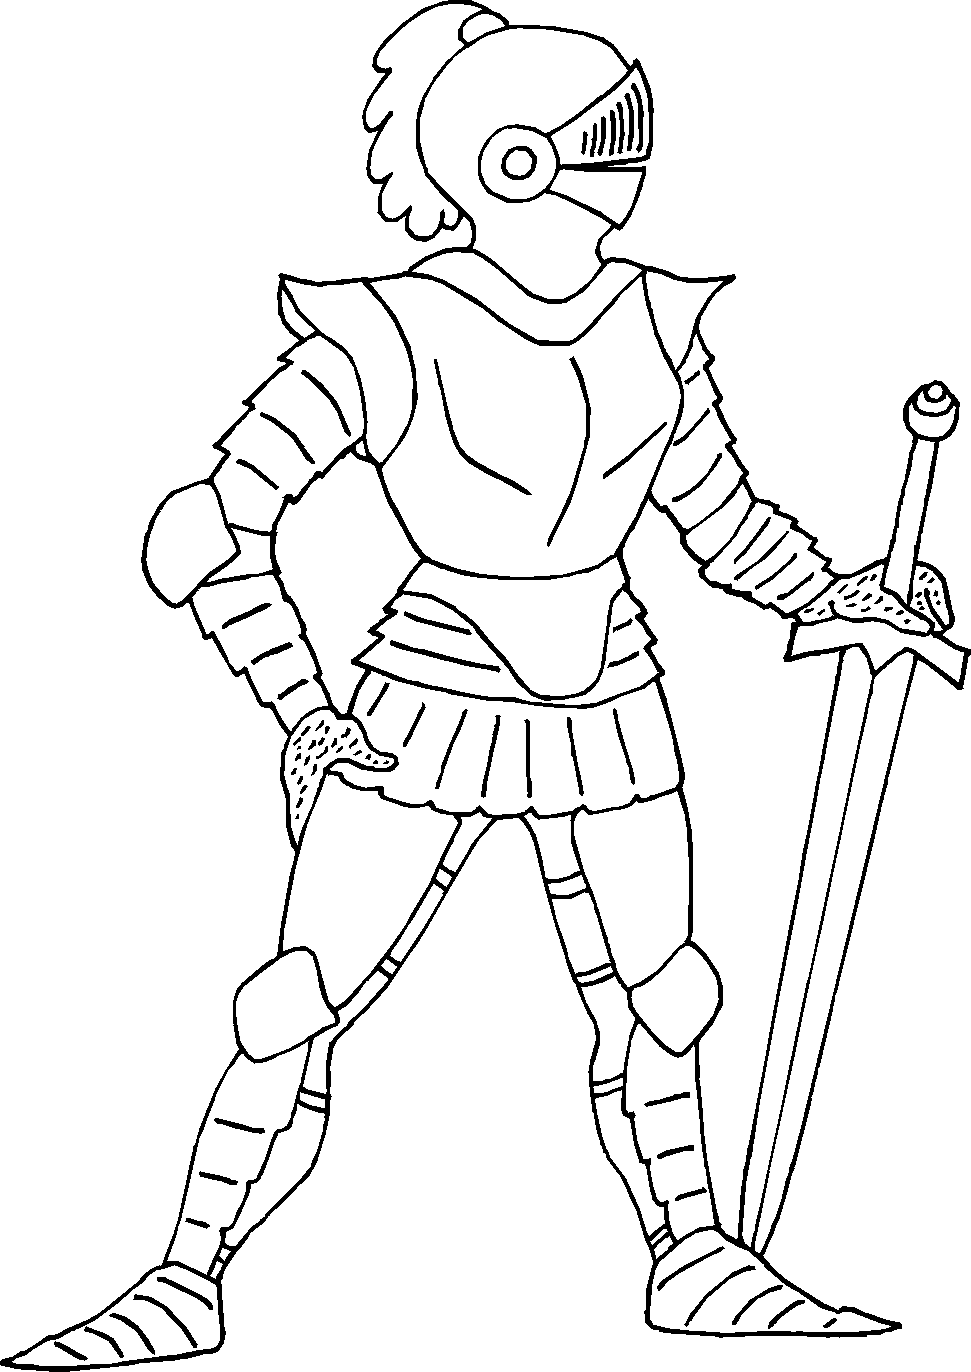 dragon-knight-coloring-page-coloring-pages